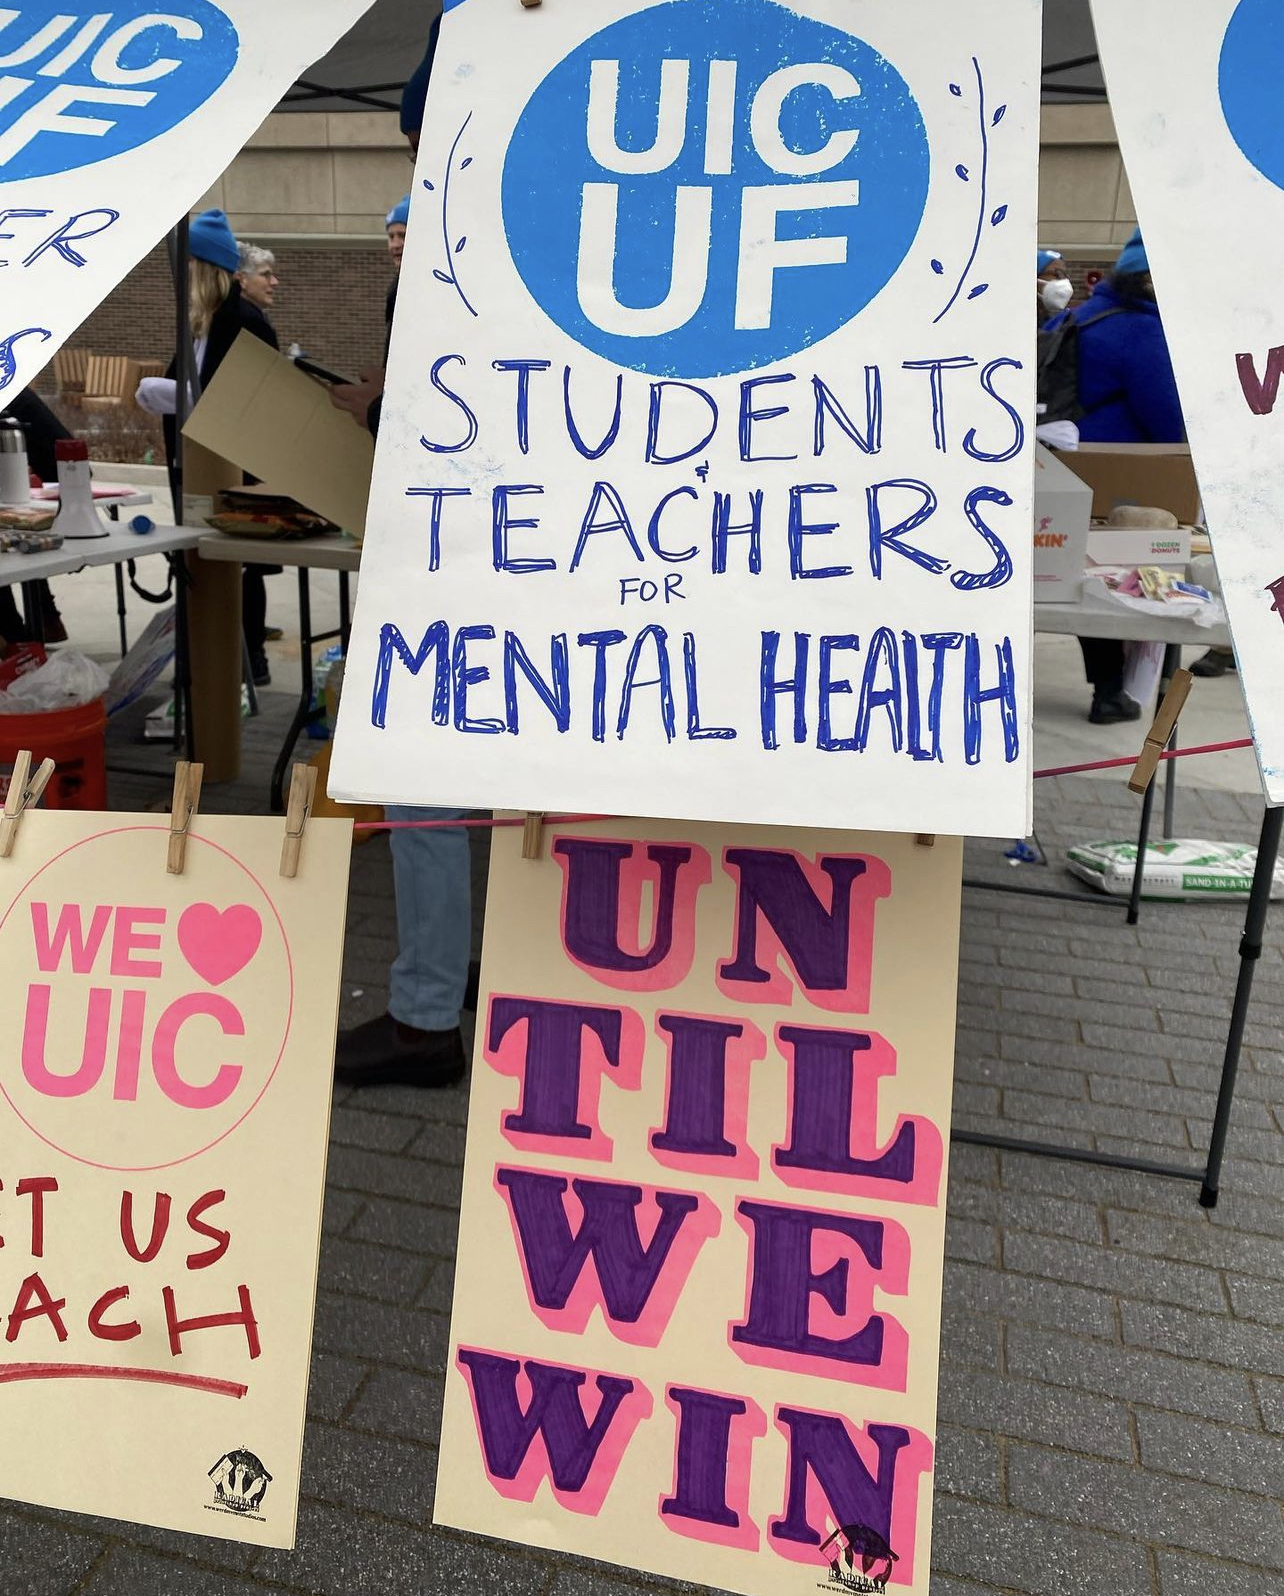 Three posters hanging on a dry line that read UIC UF Students and Teachers for Mental Health, We Heart UIC Let Us Teach, and Until We Win.